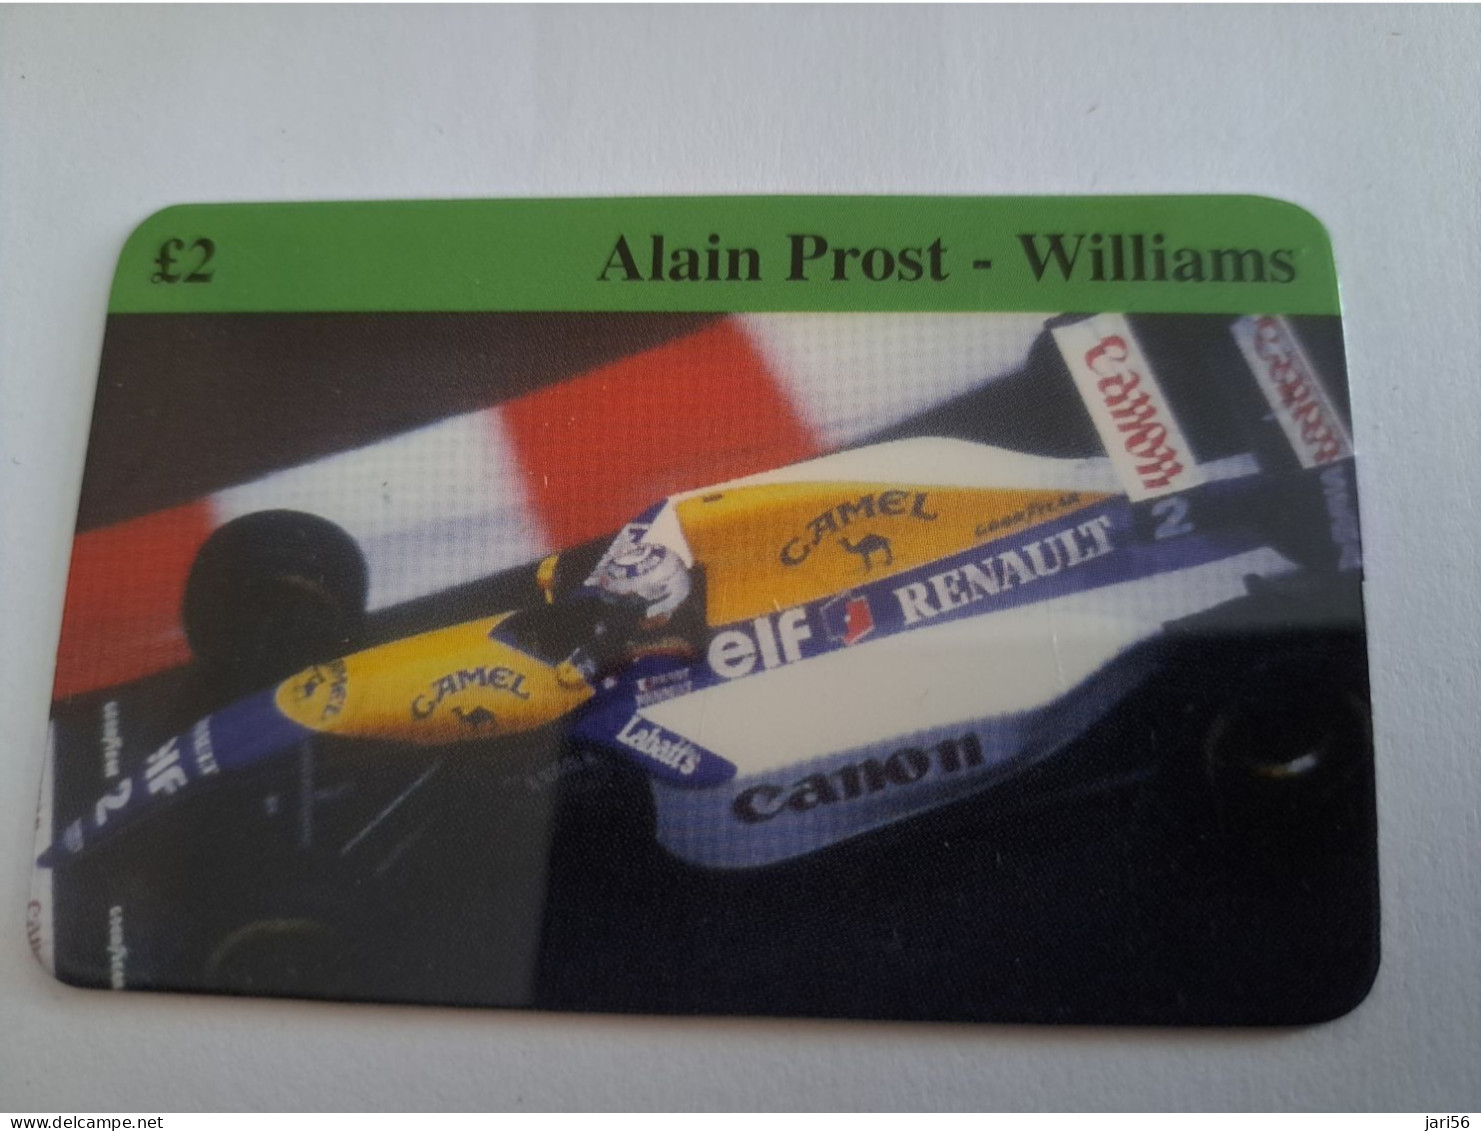 GREAT BRITAIN / 2 POUND  / RACE CAR/  ALAN PROST - WILLIAMS    /    PREPAID CARD/ USED   **15715** - [10] Collections